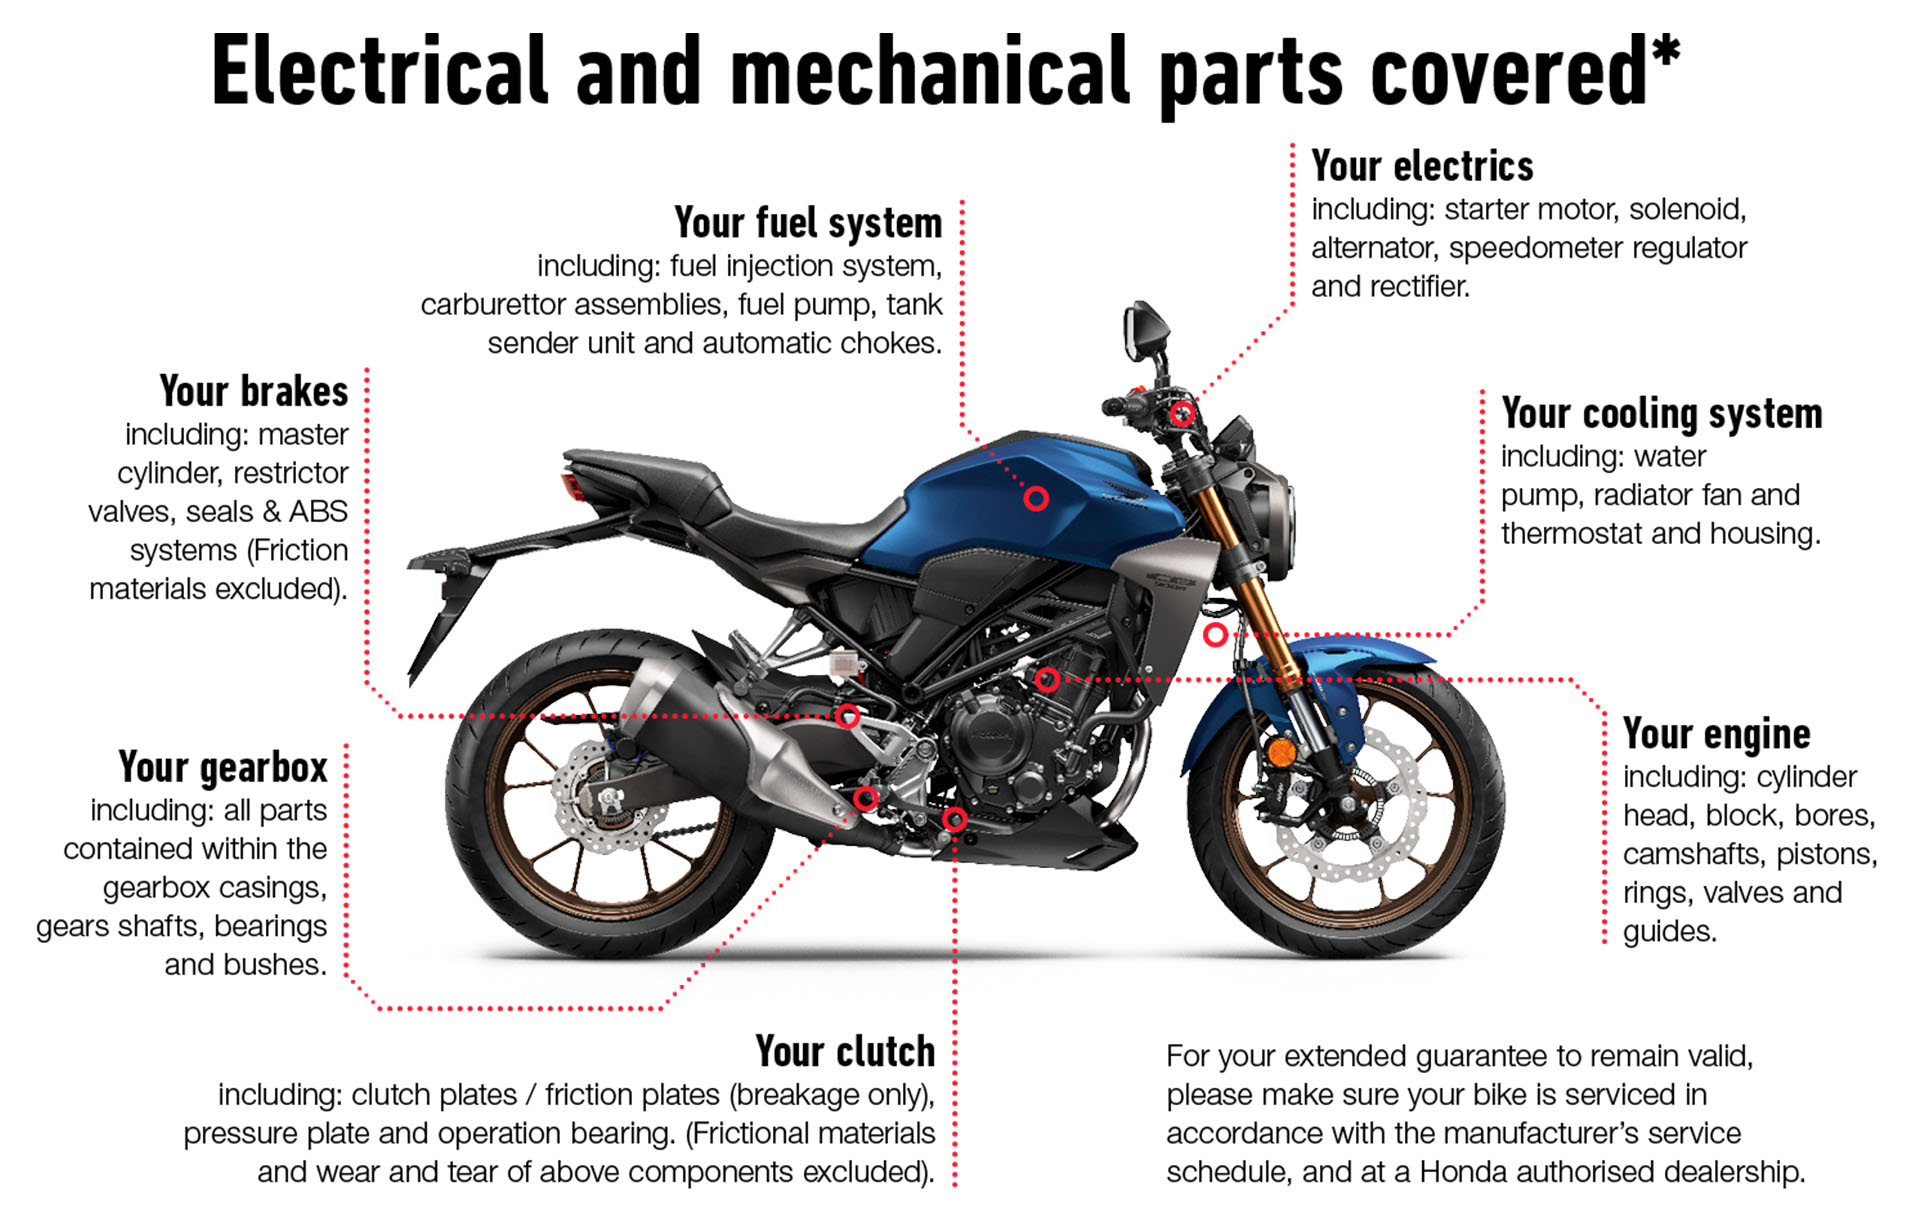 Electrical and mechanical parts covered by Honda used bike guarantee